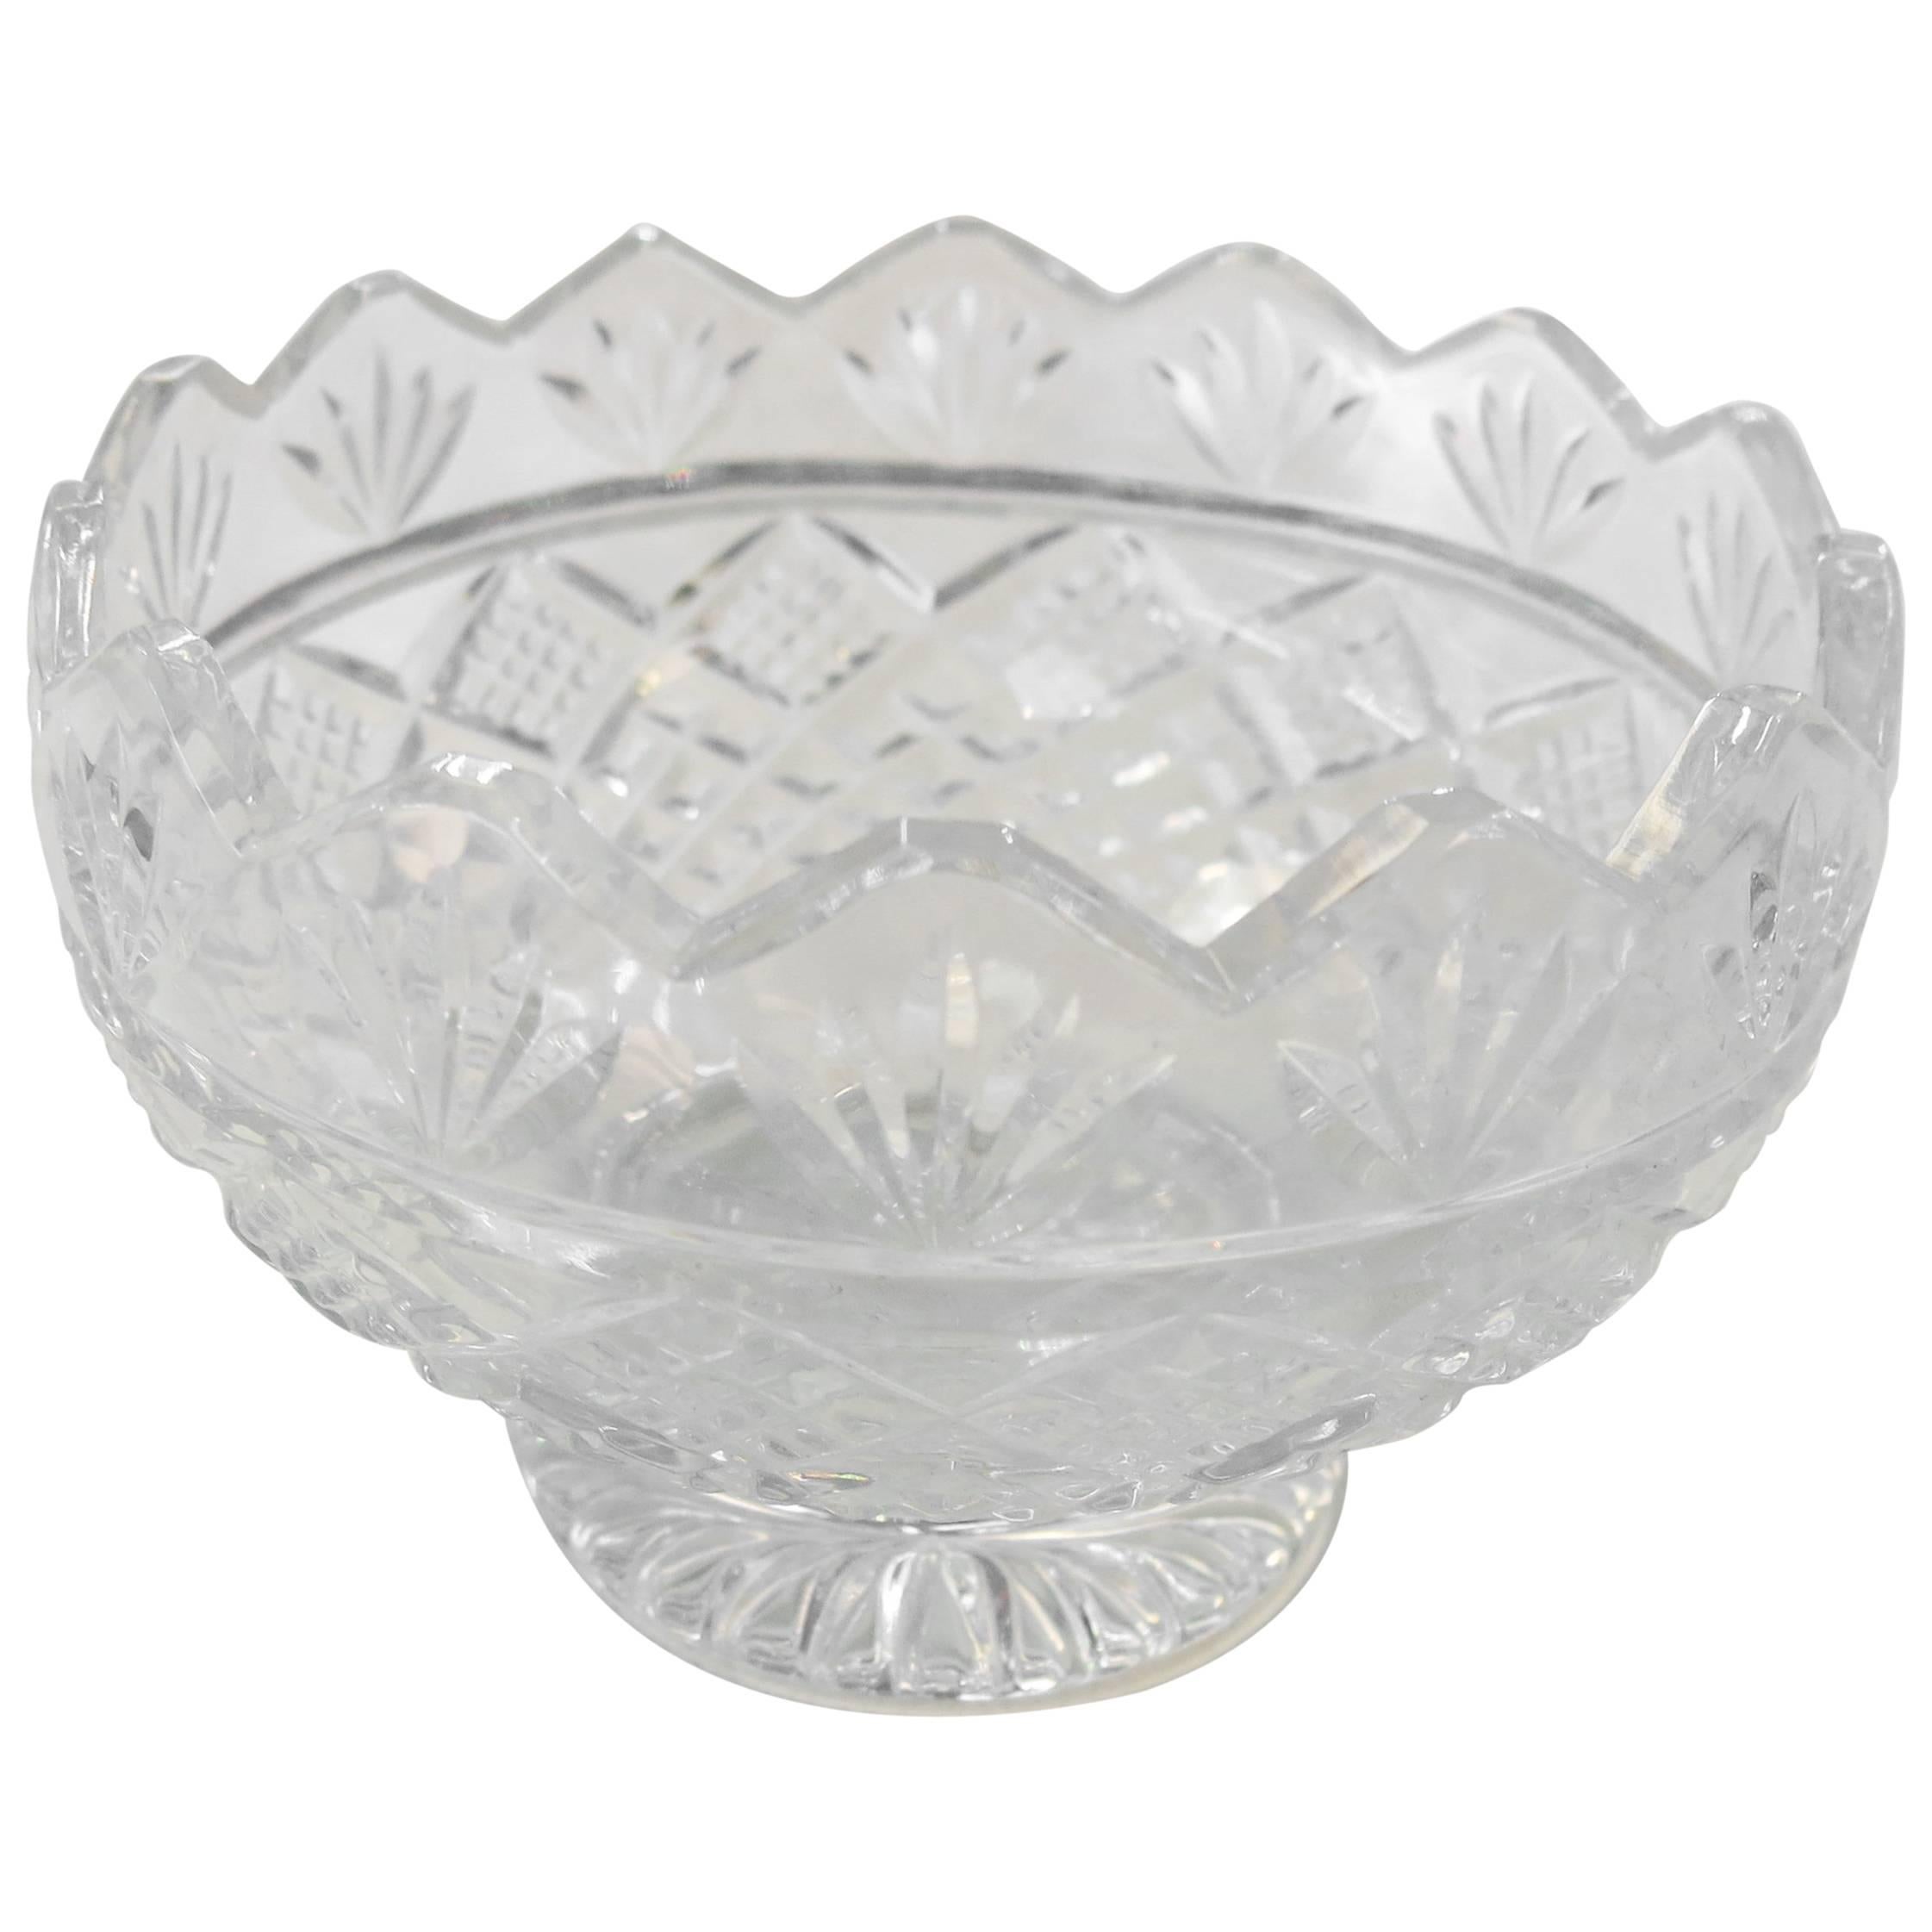 Replacement Epergne Glass Bowl For Sale